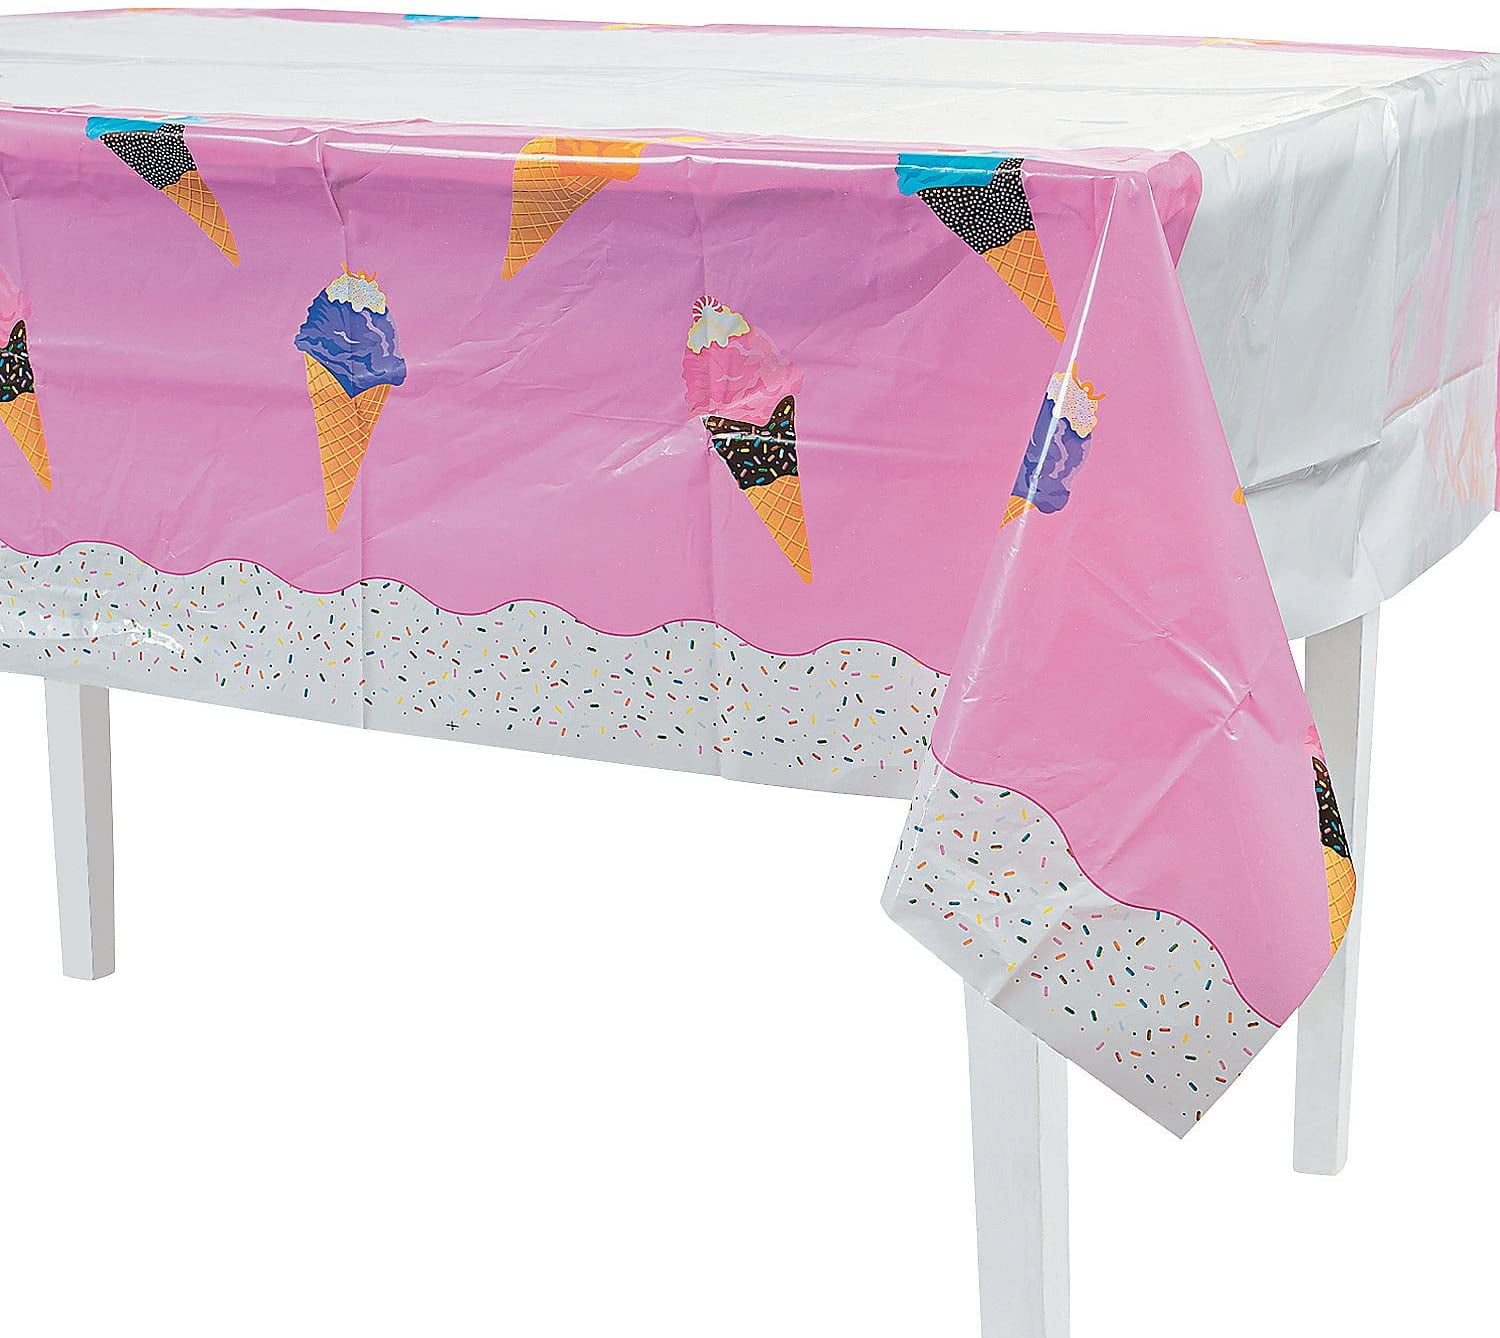 I Scream For Ice Cream Tablecover for Birthday Fun Express Print Table Covers Birthday Table Covers Party Supplies 1 Piece FNEIN-70/7045